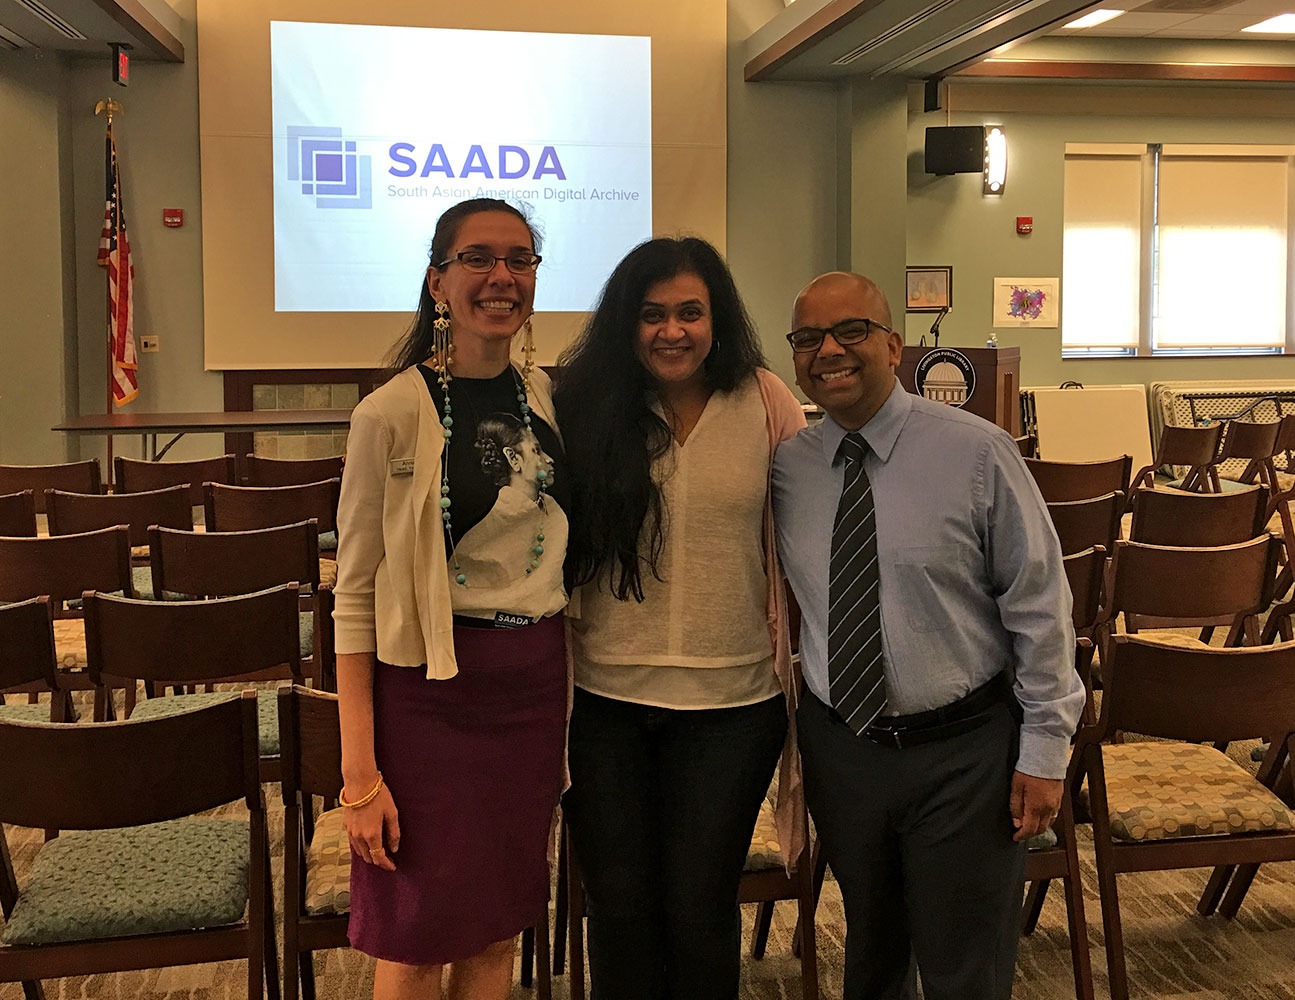 Dr. Joshi is a proud supporter of SAADA, the South Asian American Digital Archive. Pictured here with Livingston (NJ) Librarian Anna Coats and SAADA founder Samip Mallick.